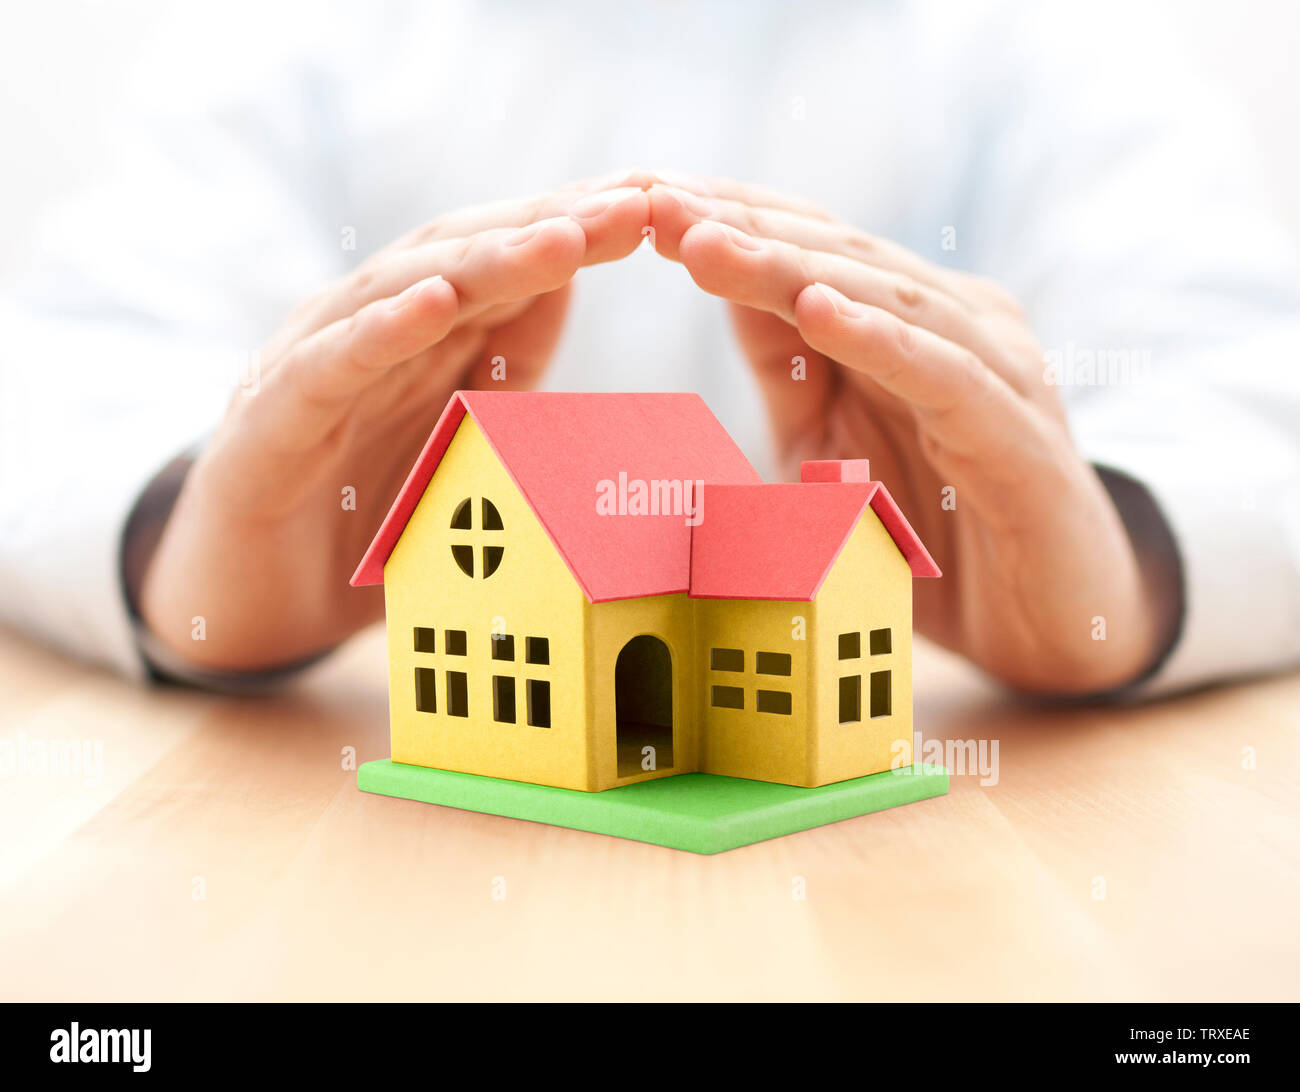 Colorful toy house covered by hands Stock Photo